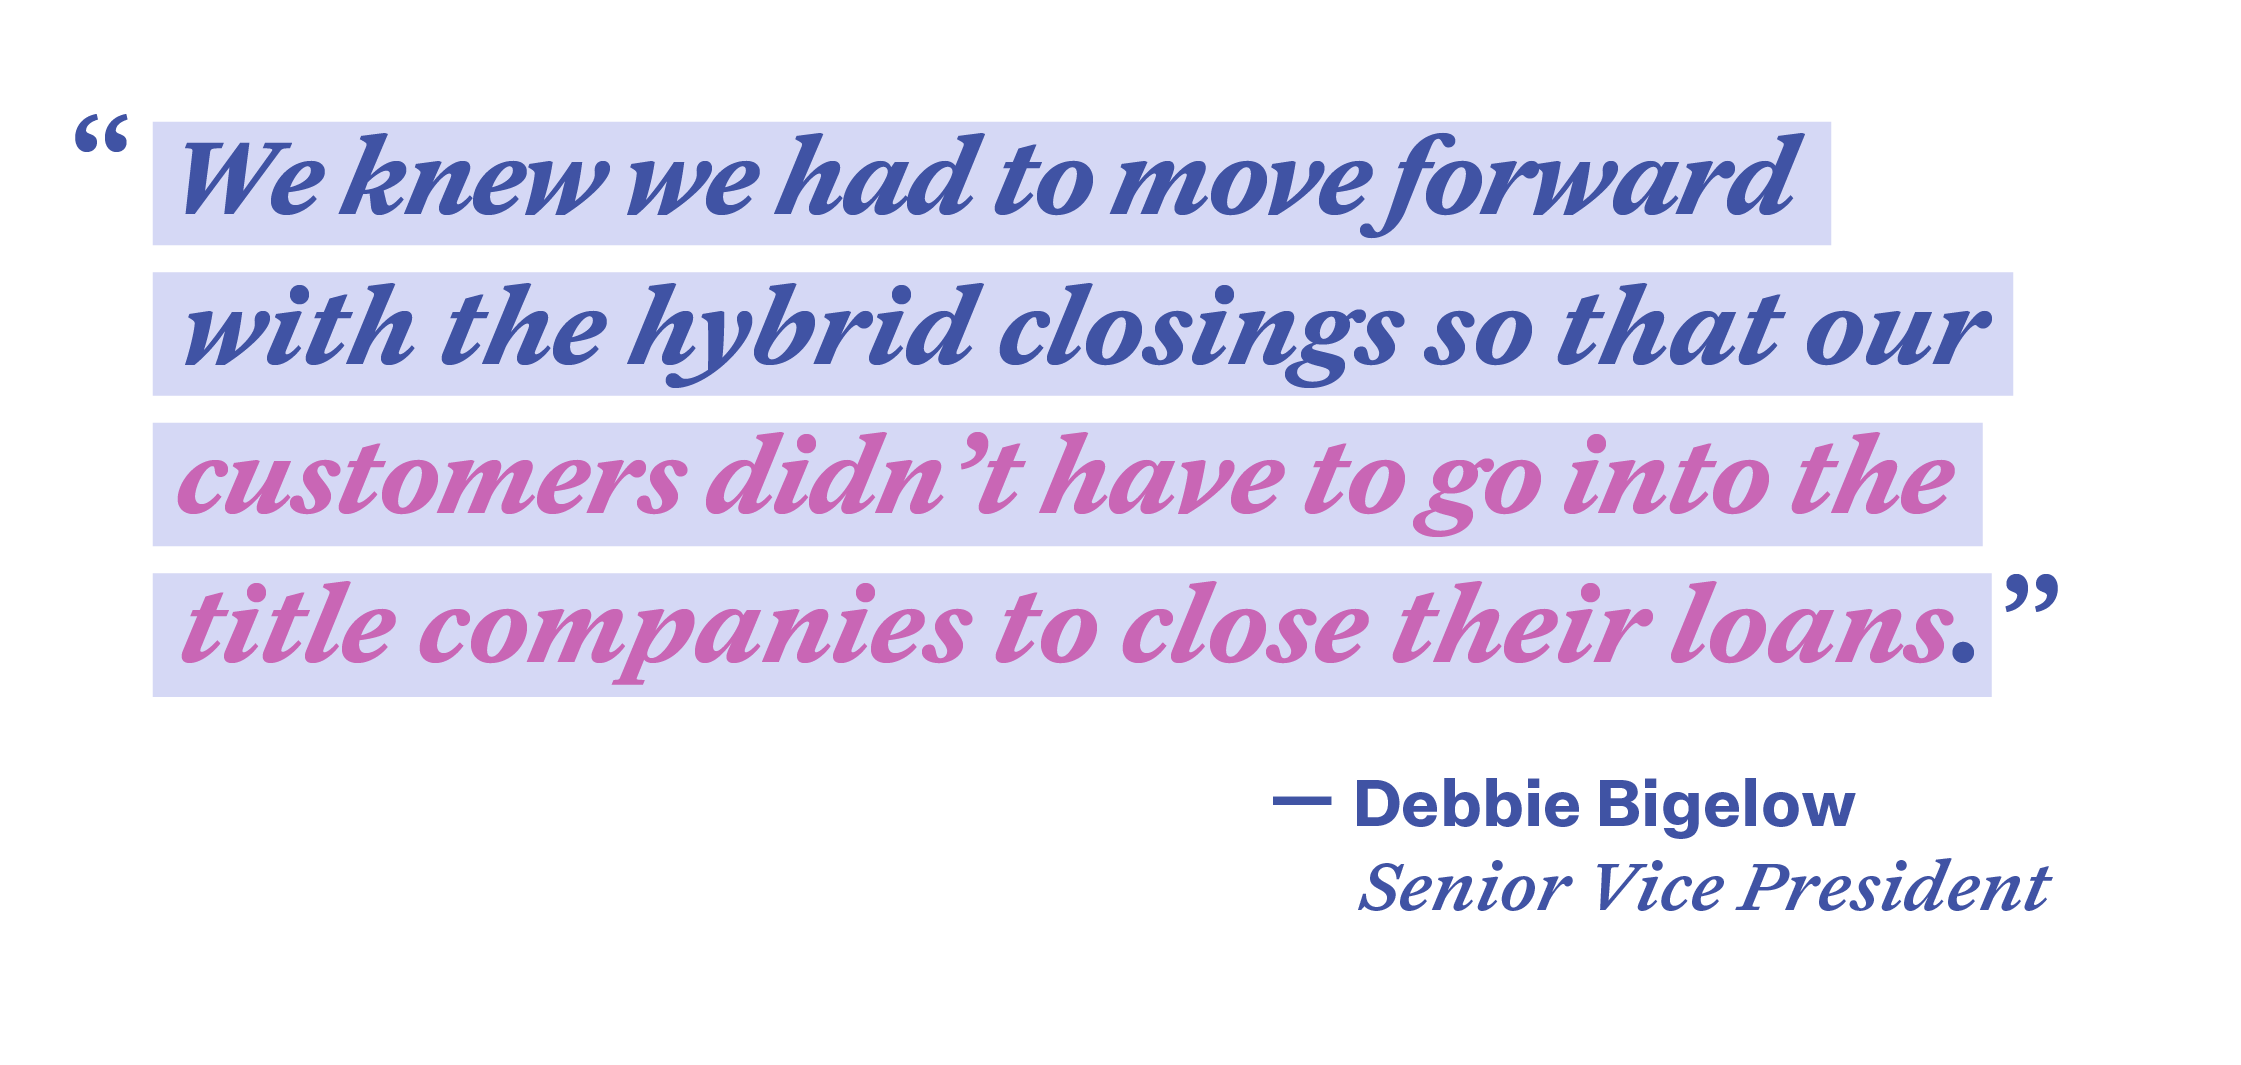 We knew we had to move forward with the hybrid closings